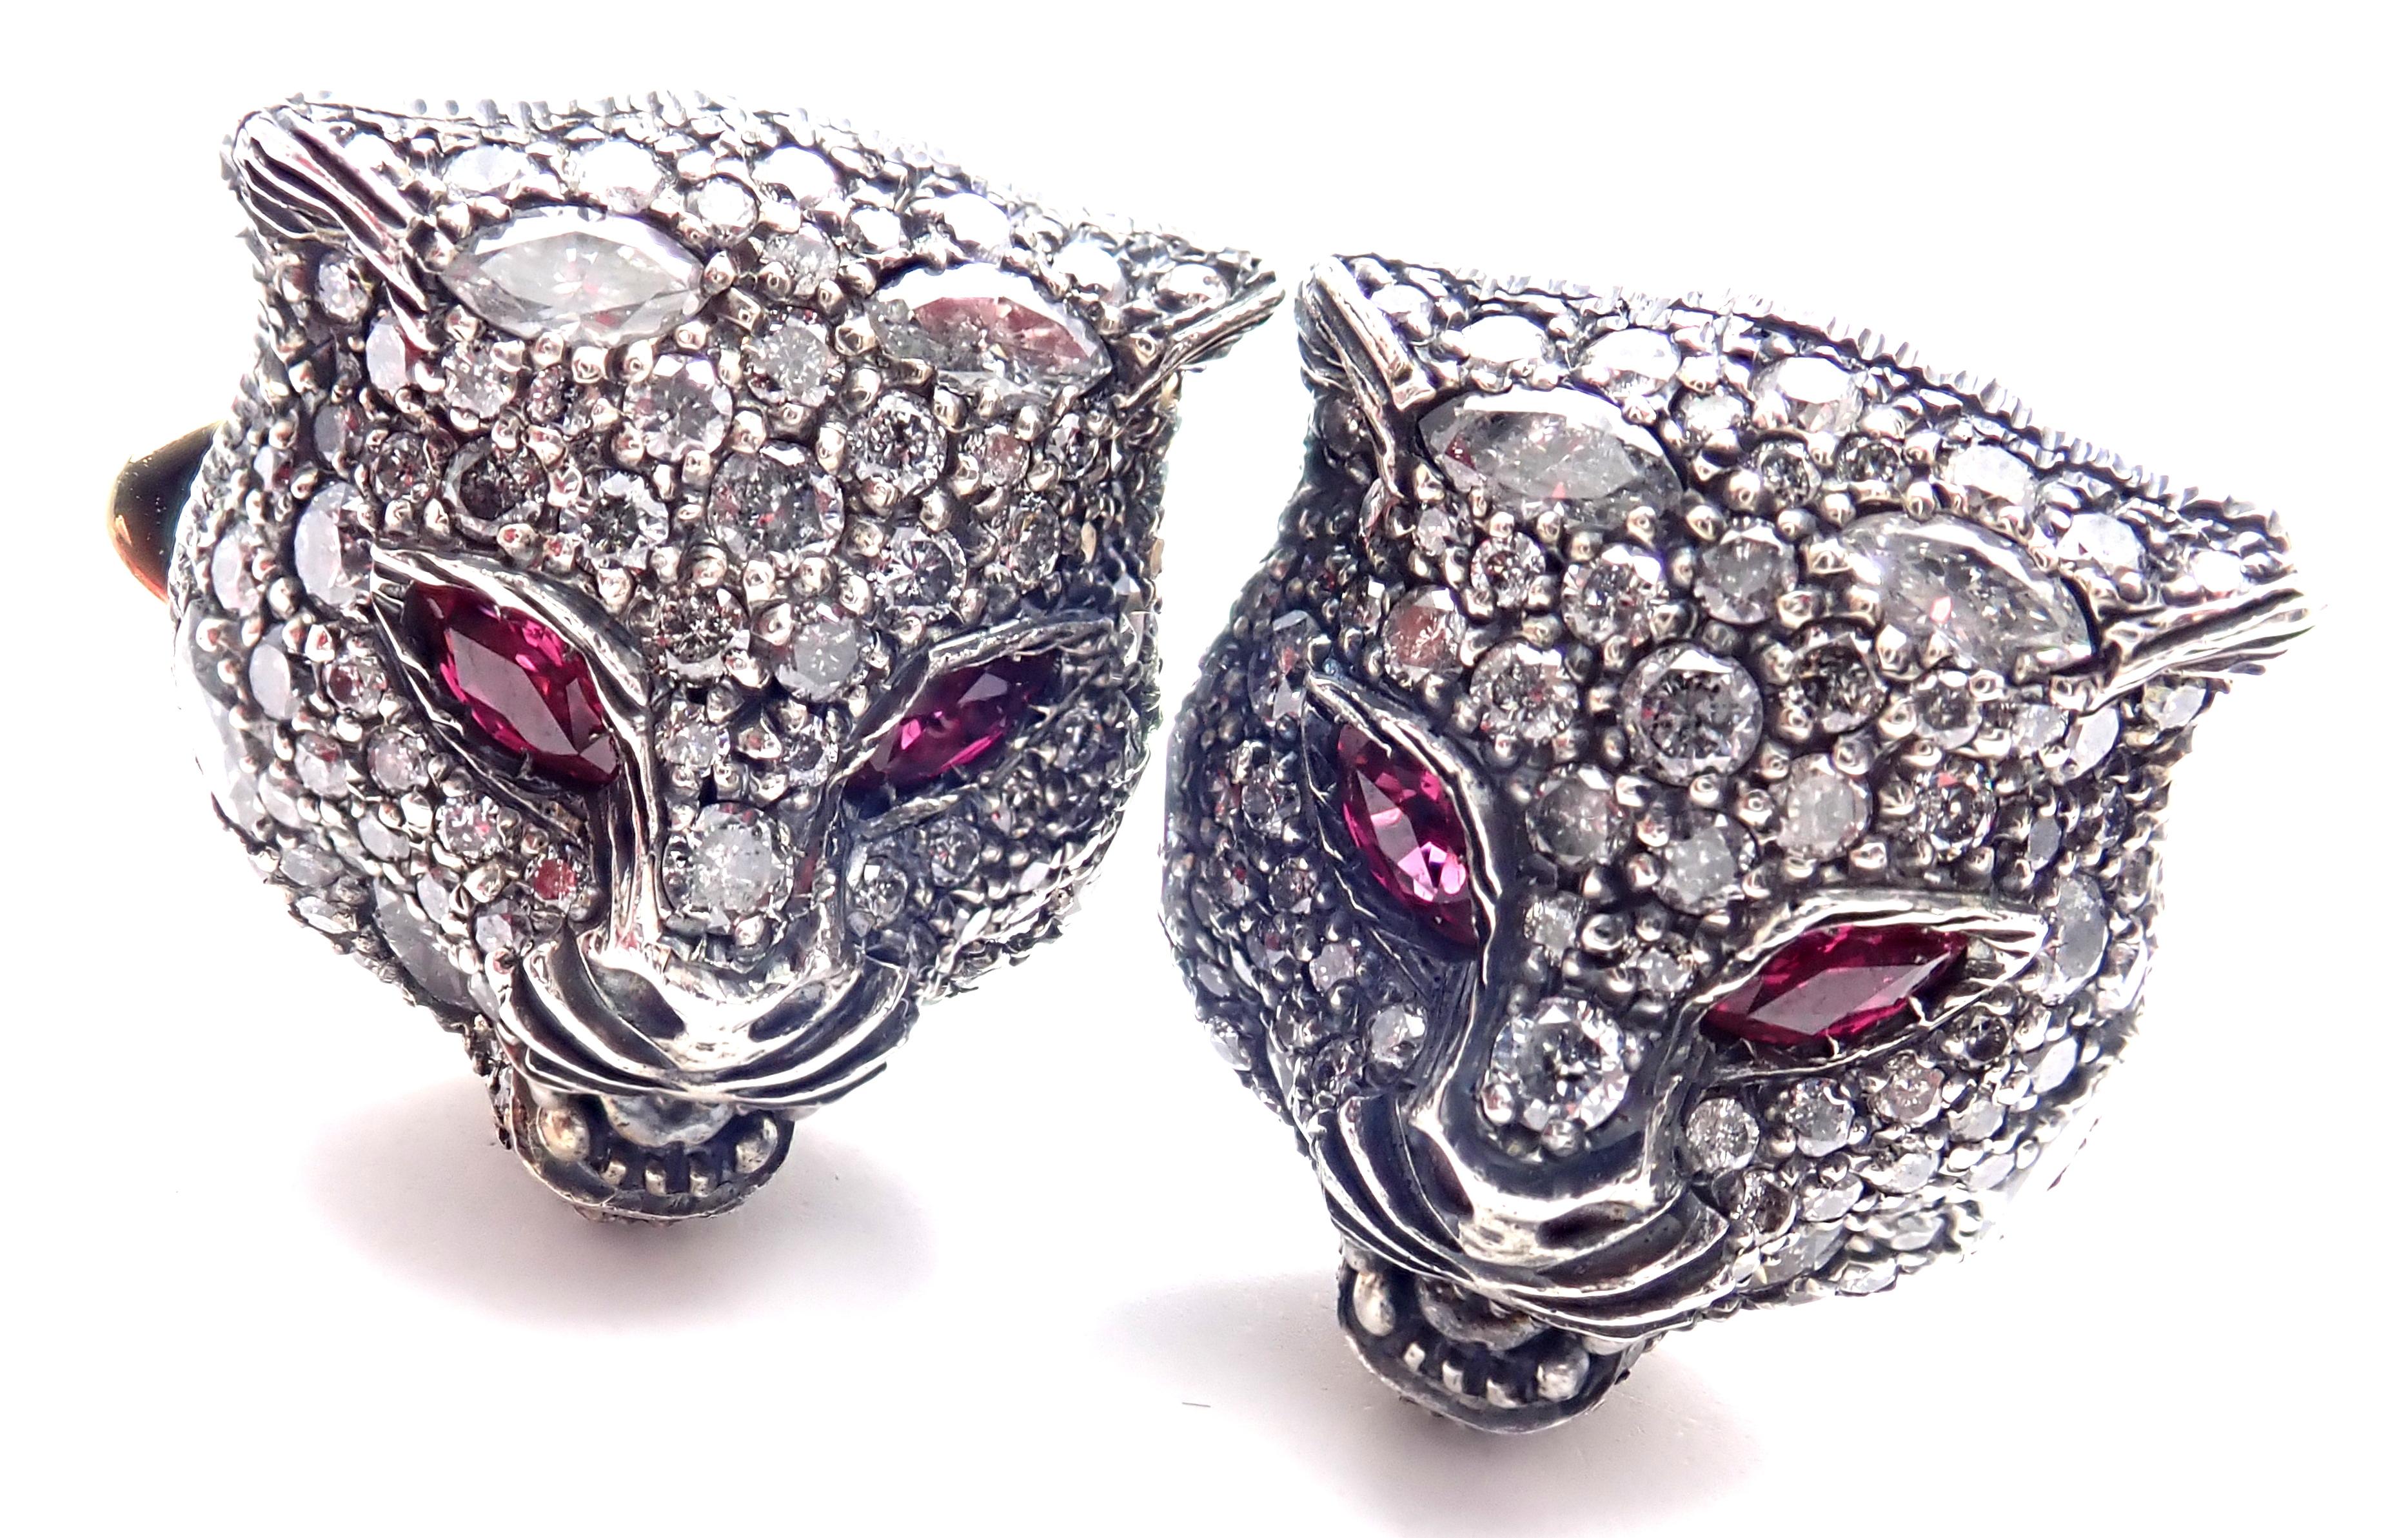 18k Gold Le Marché des Merveilles Diamond Ruby Tiger Head Cufflinks by Gucci.
With Round brilliant cut and marque cut diamonds 
2 Marque shape rubies
These cufflinks come with original box.
Details:
Measurements: 19mm x 17mm x 27
Weight: 19.7